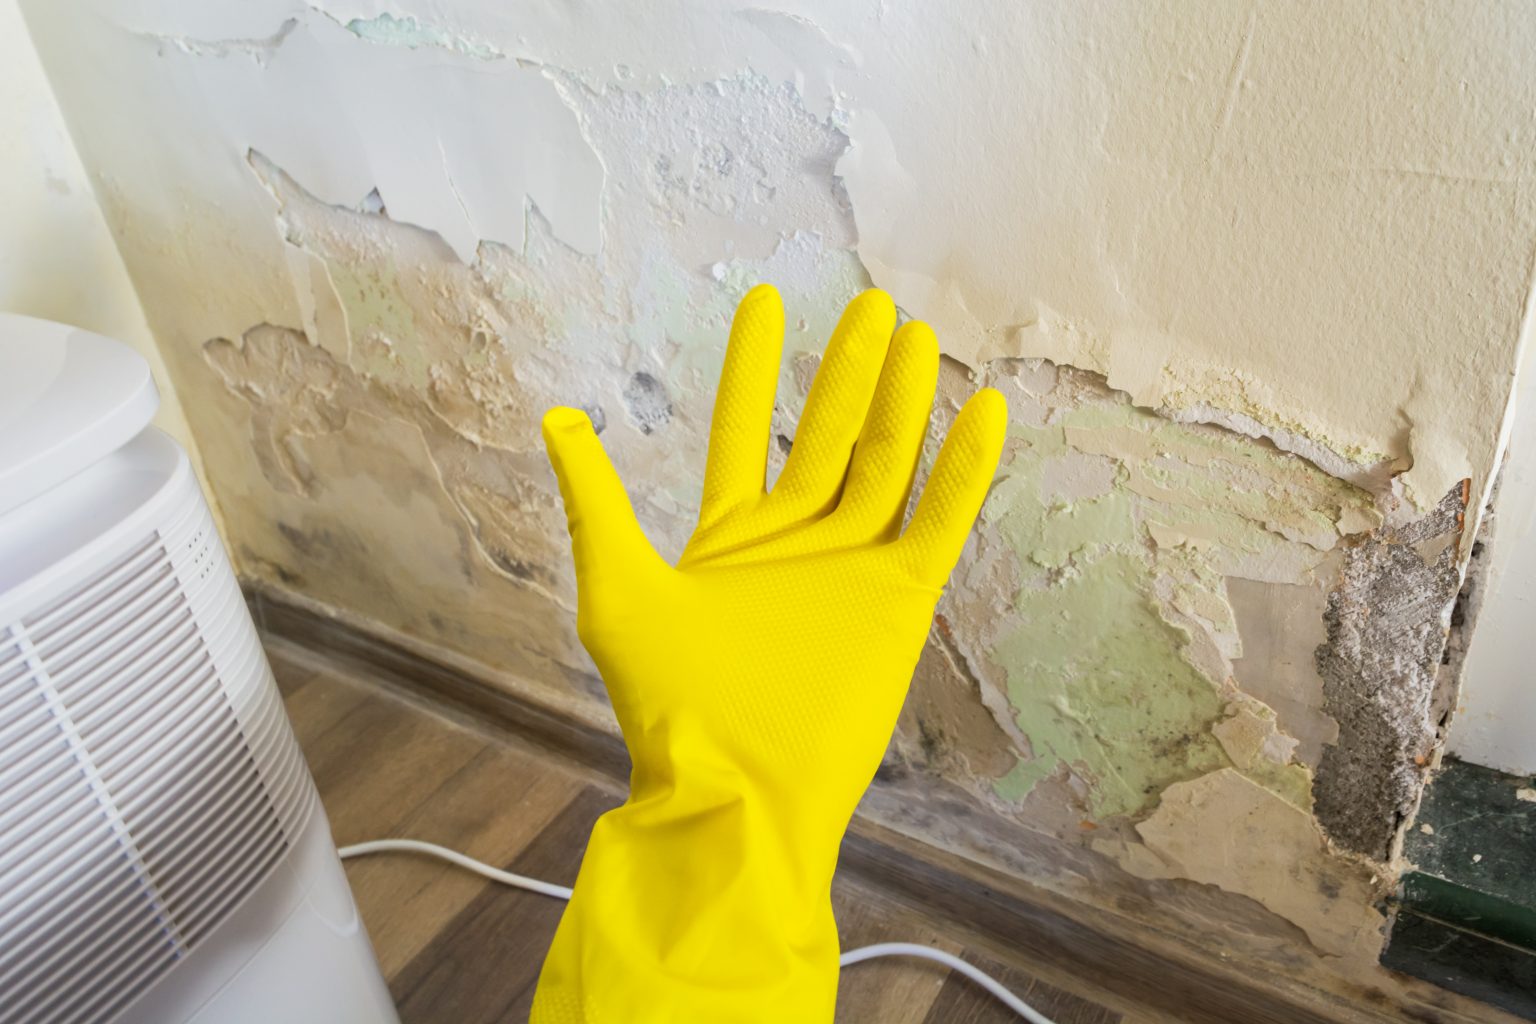 Preventing Mold After a Disaster